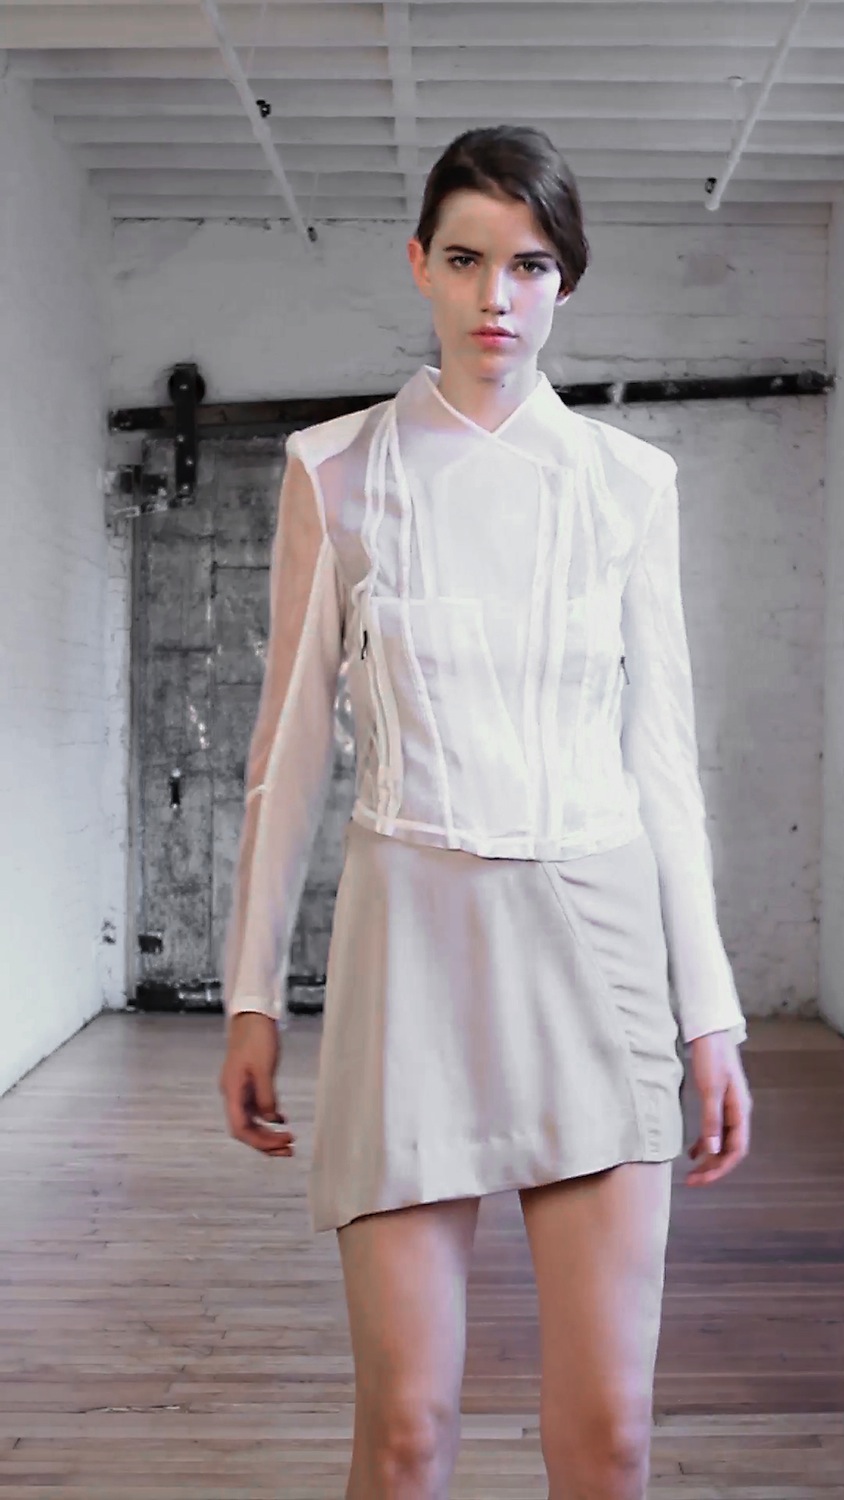 IMPROVD’s Spring/Summer 2011 collection